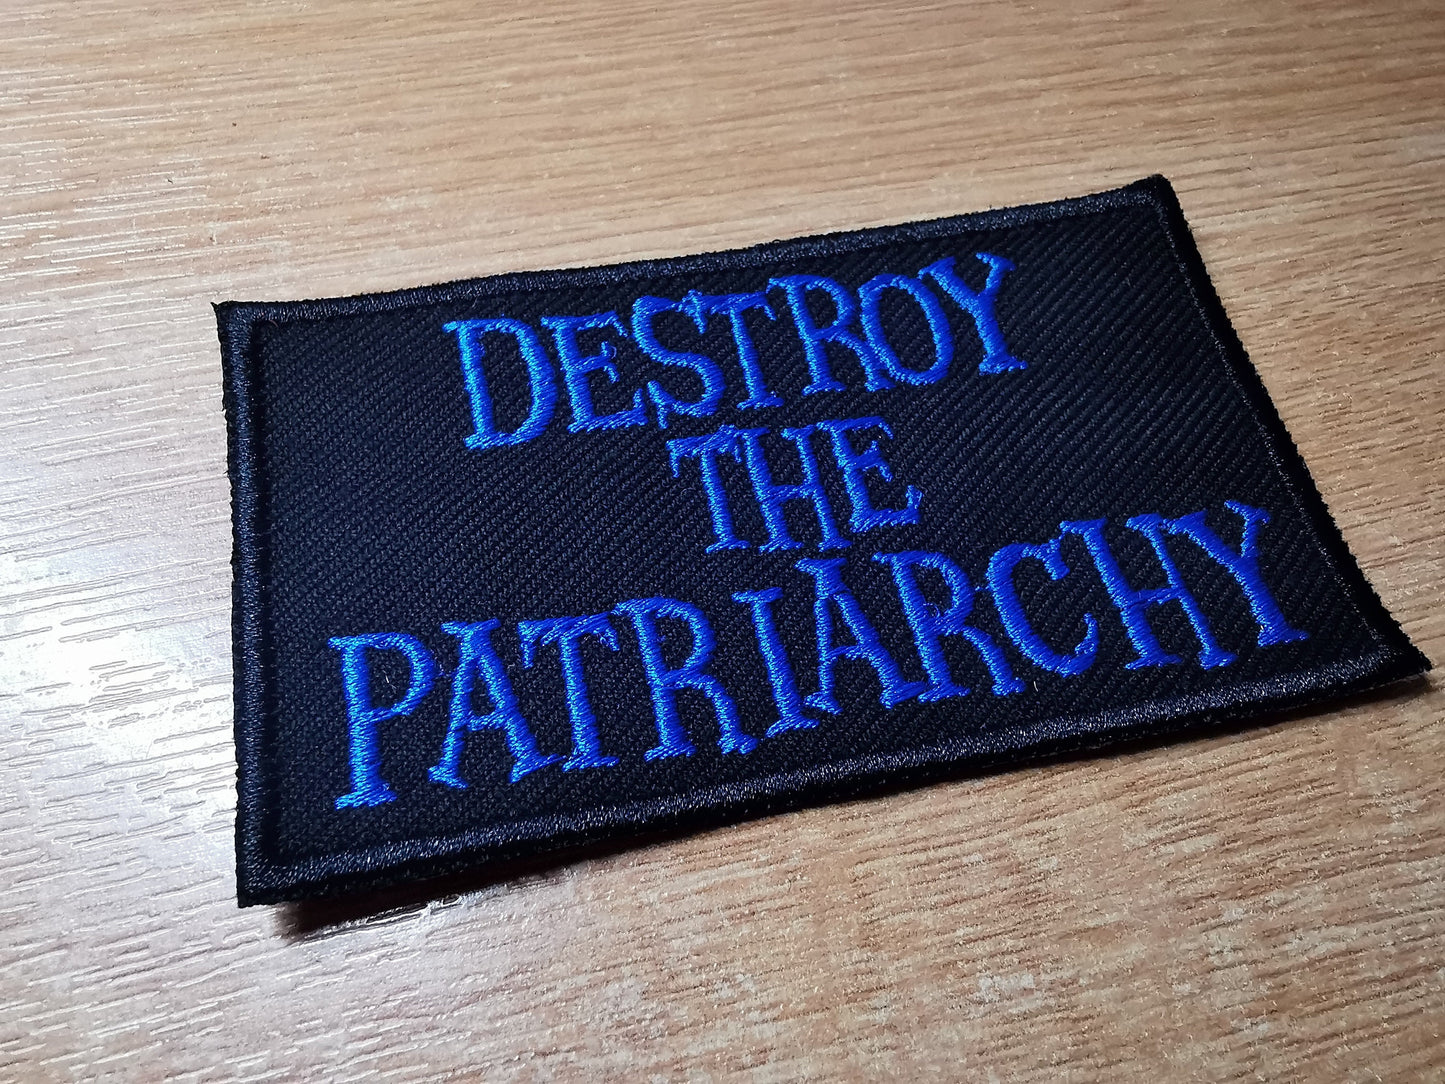 Destroy the Patriarchy Iron On Embroidered Patch Feminist and Feminism anti-misogyny Protest patches and appliques